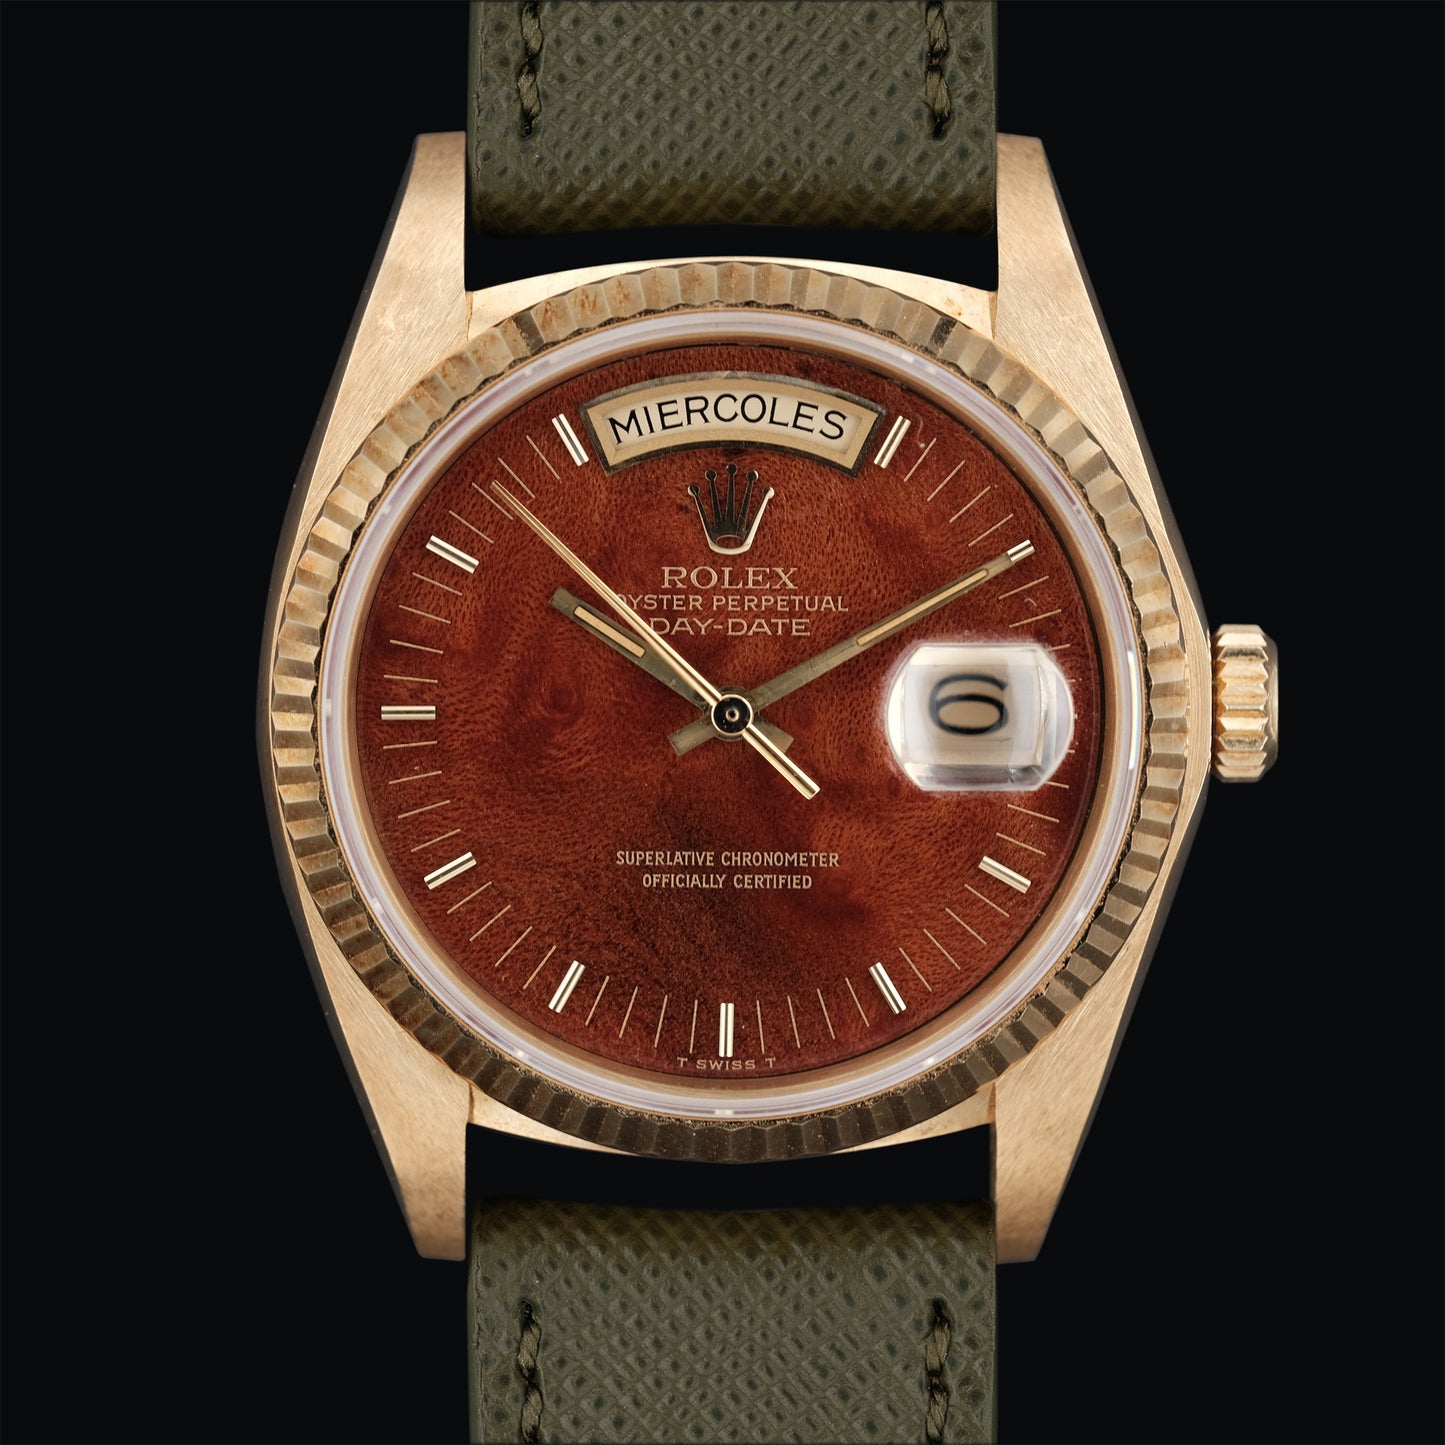 Rolex Day-Date 18038 Wood Dial from 1981